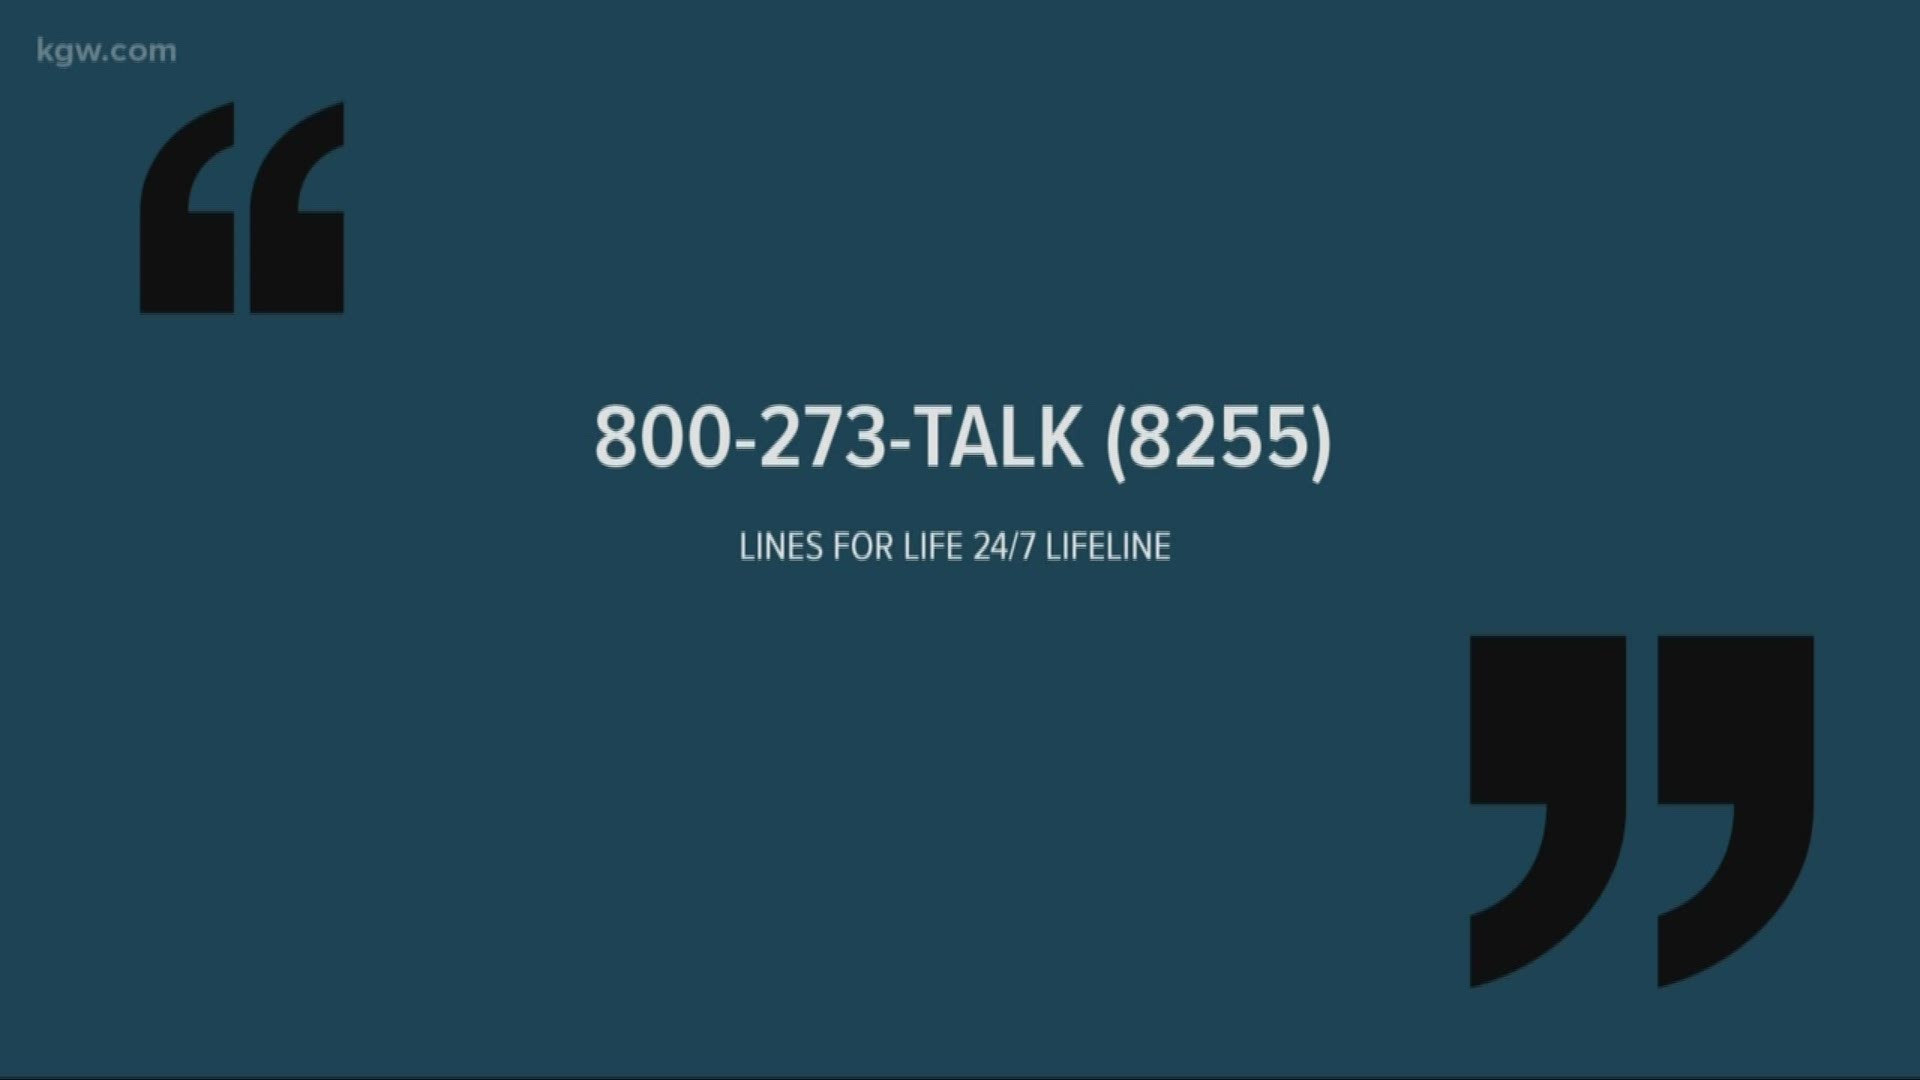 KGW News partnered with Lines for Life to answer questions about mental health.